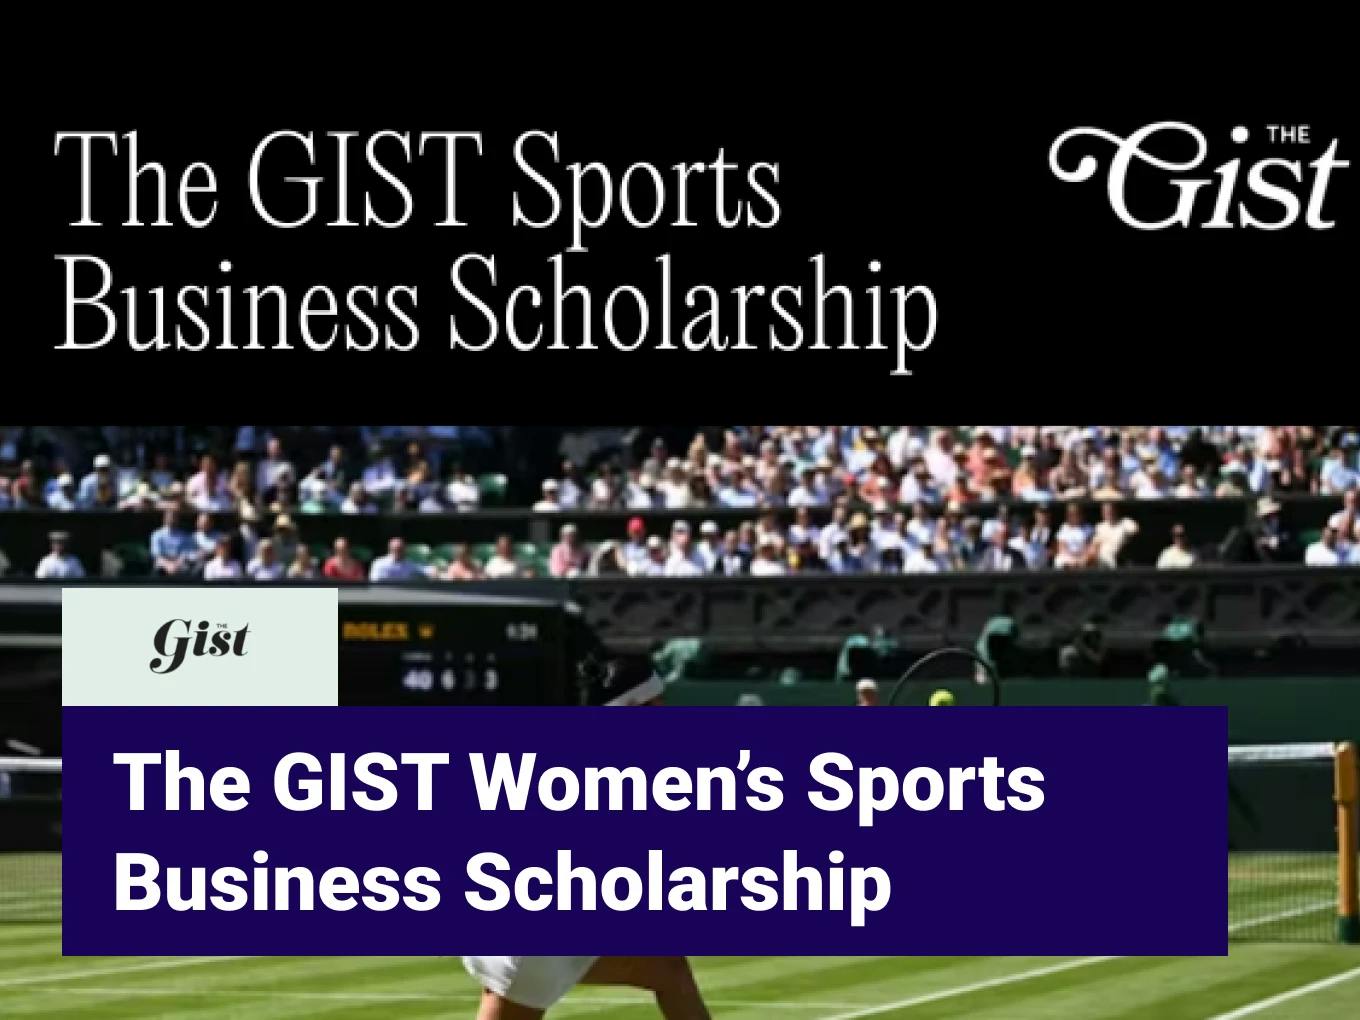 The GIST Women’s Sports Business Scholarship